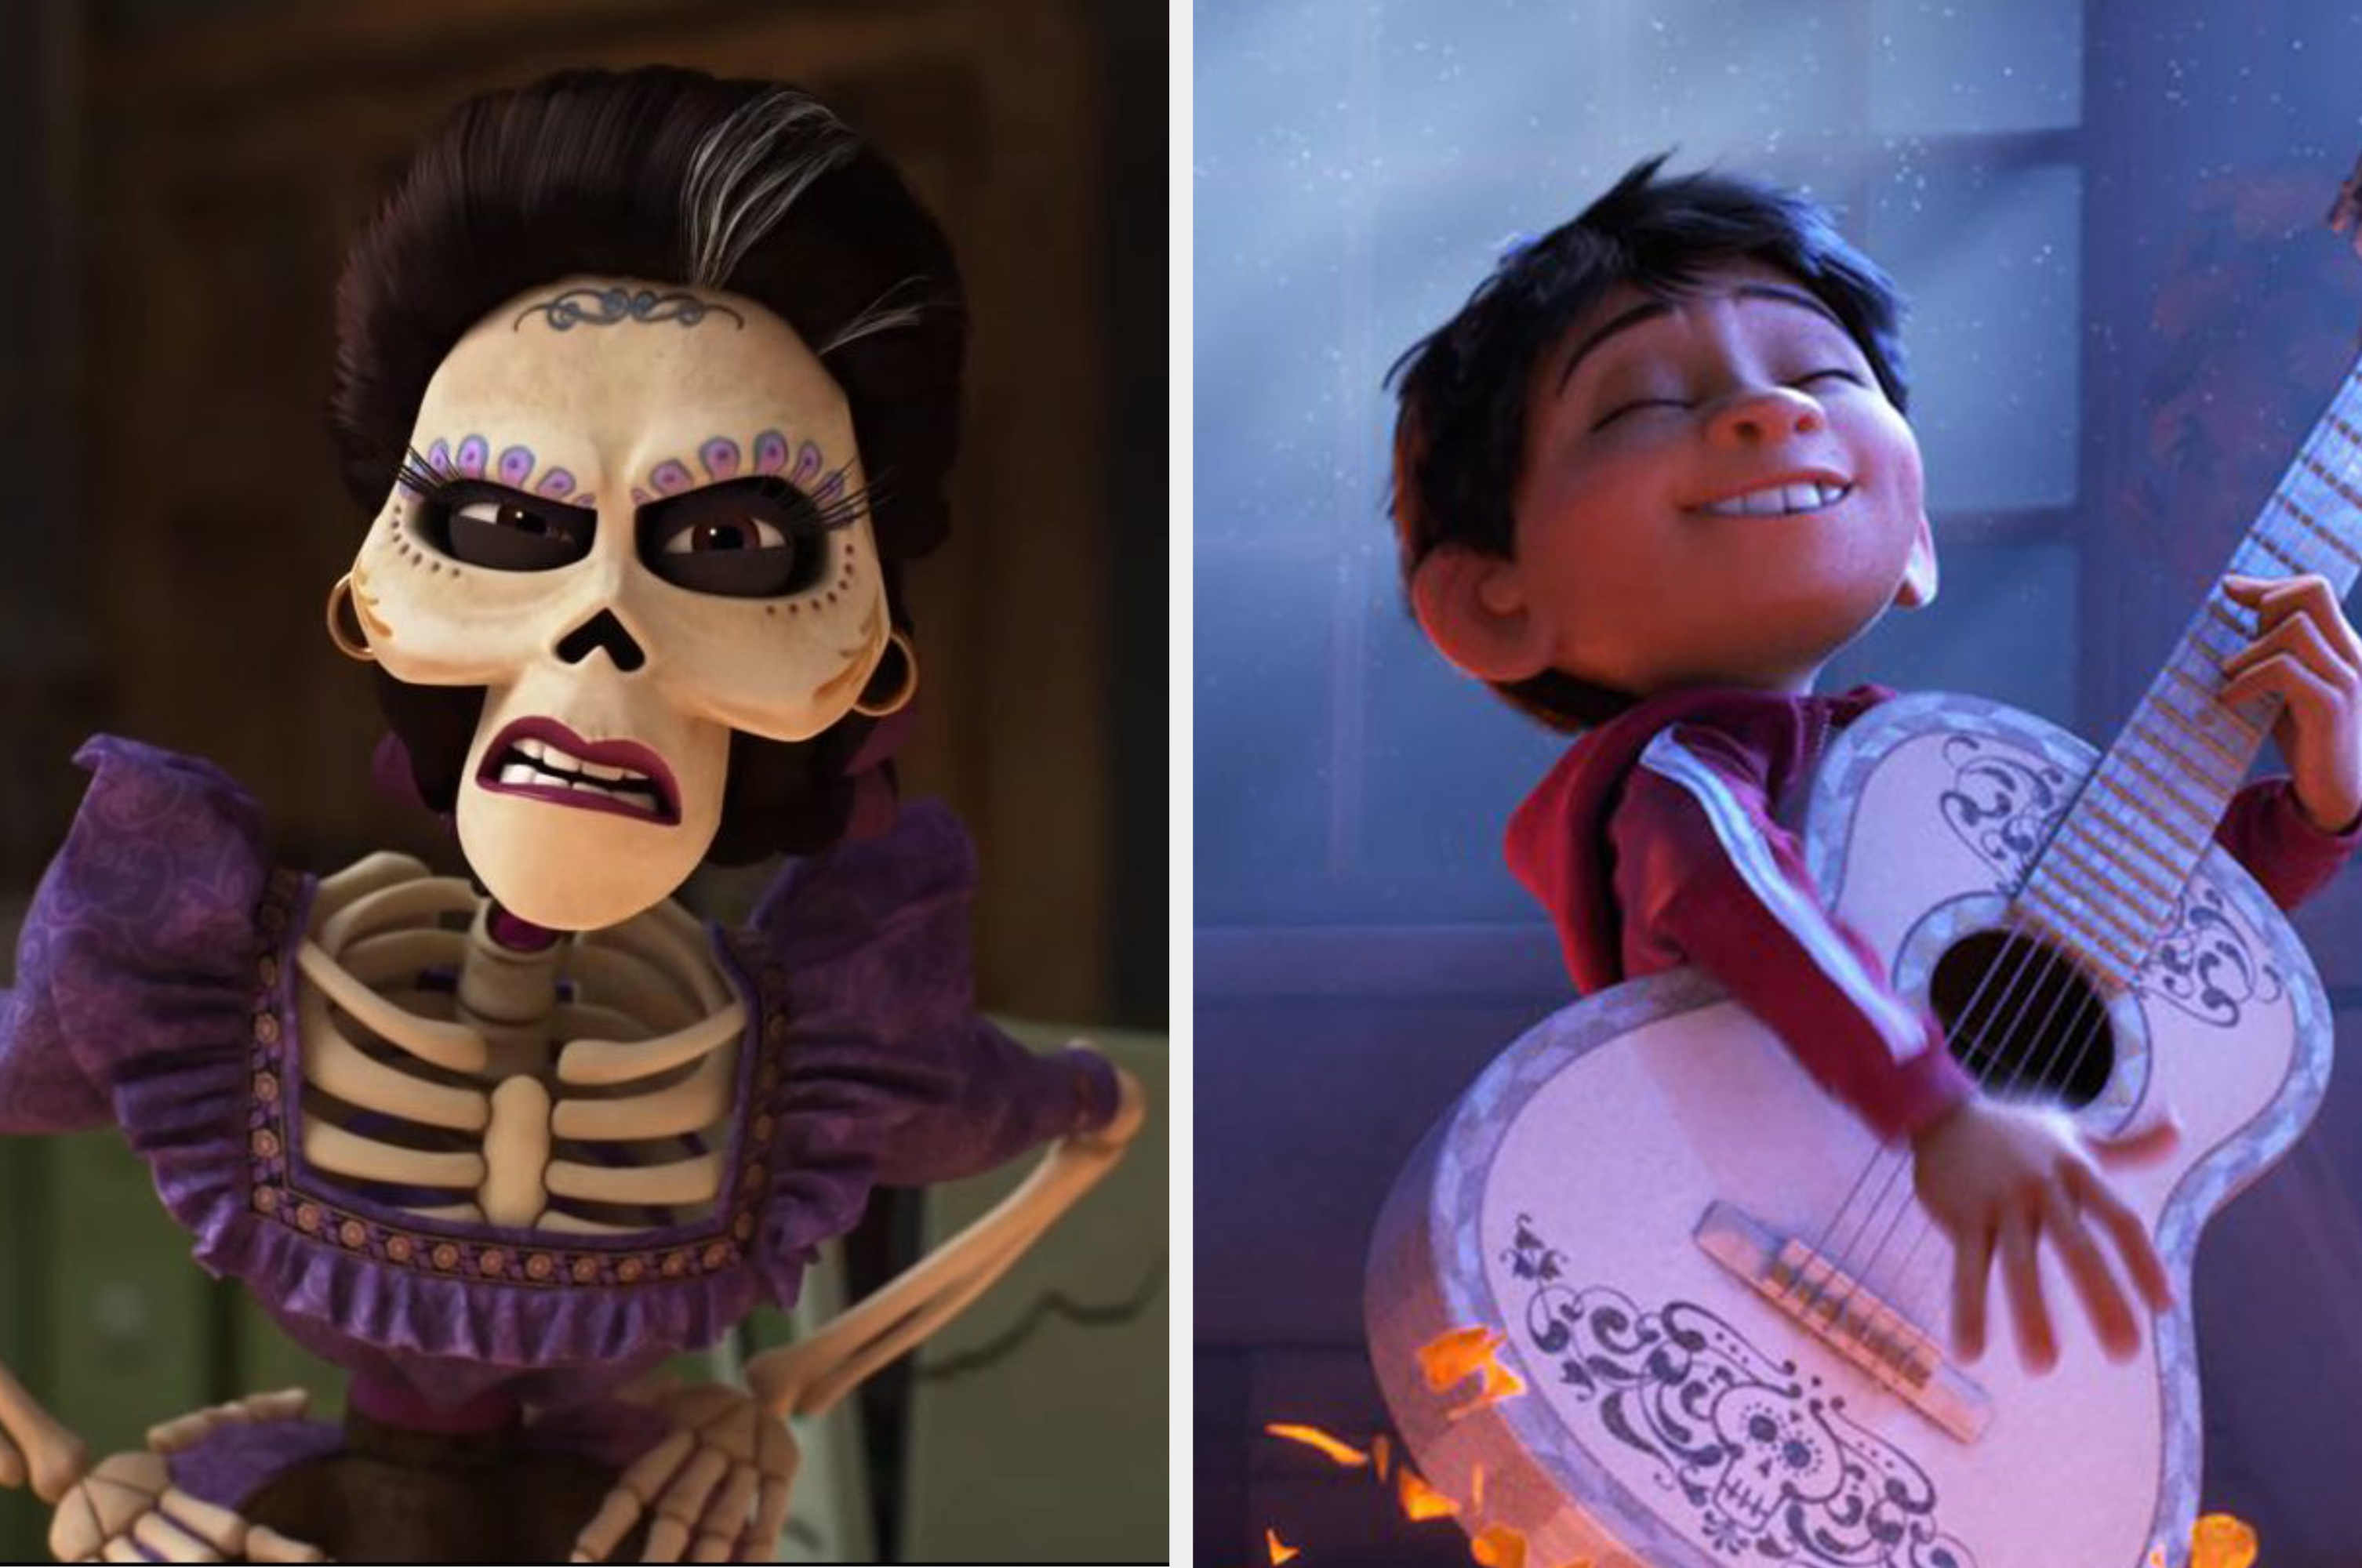 Do You Remember The Movie Coco As Well As You Think You Do?